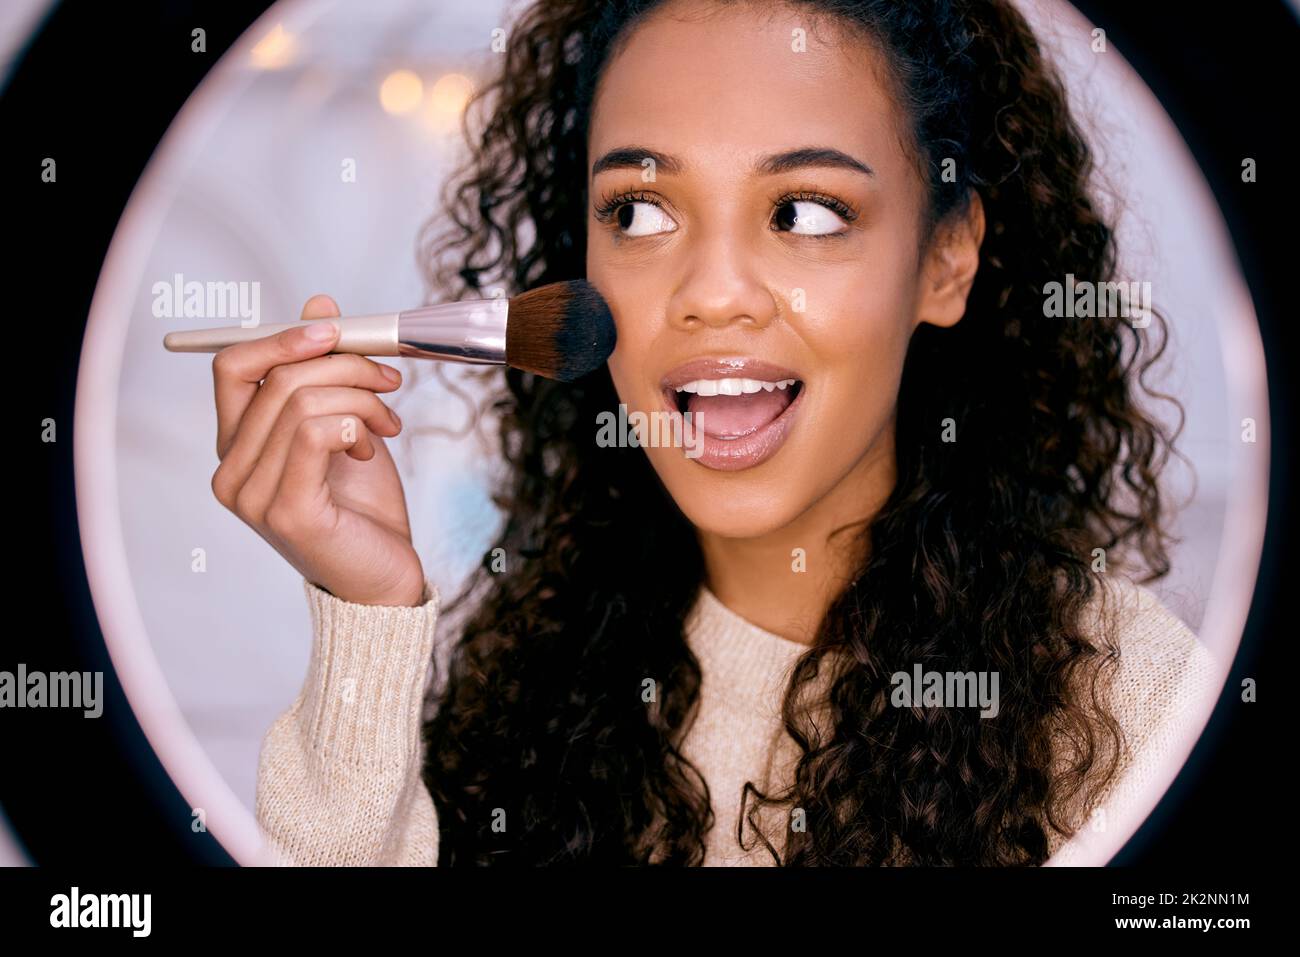 Tell me what you think about this look in the comments. Shot of a young woman doing her makeup while recording a video for her blog. Stock Photo